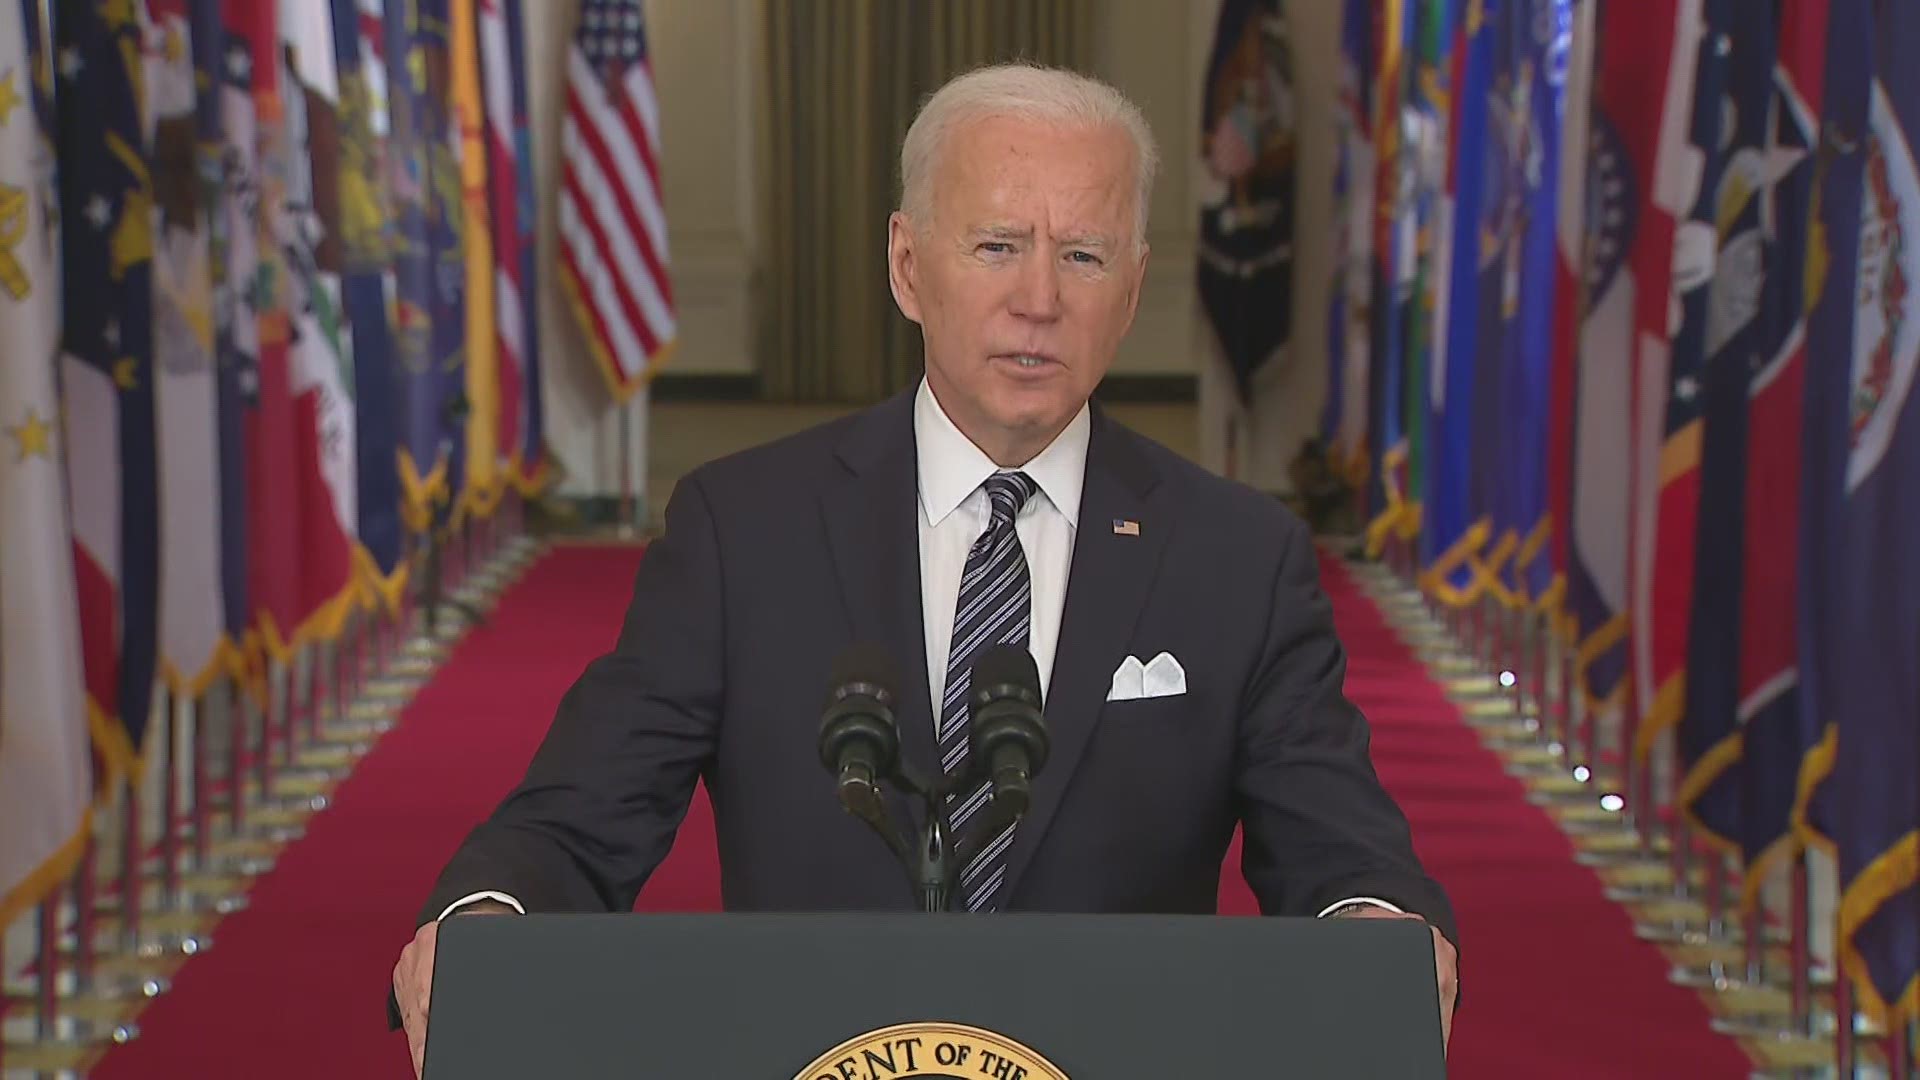 During his first primetime address, President Biden spoke about the COVID-19 pandemic's terrible cost and the losses everyone has faced.